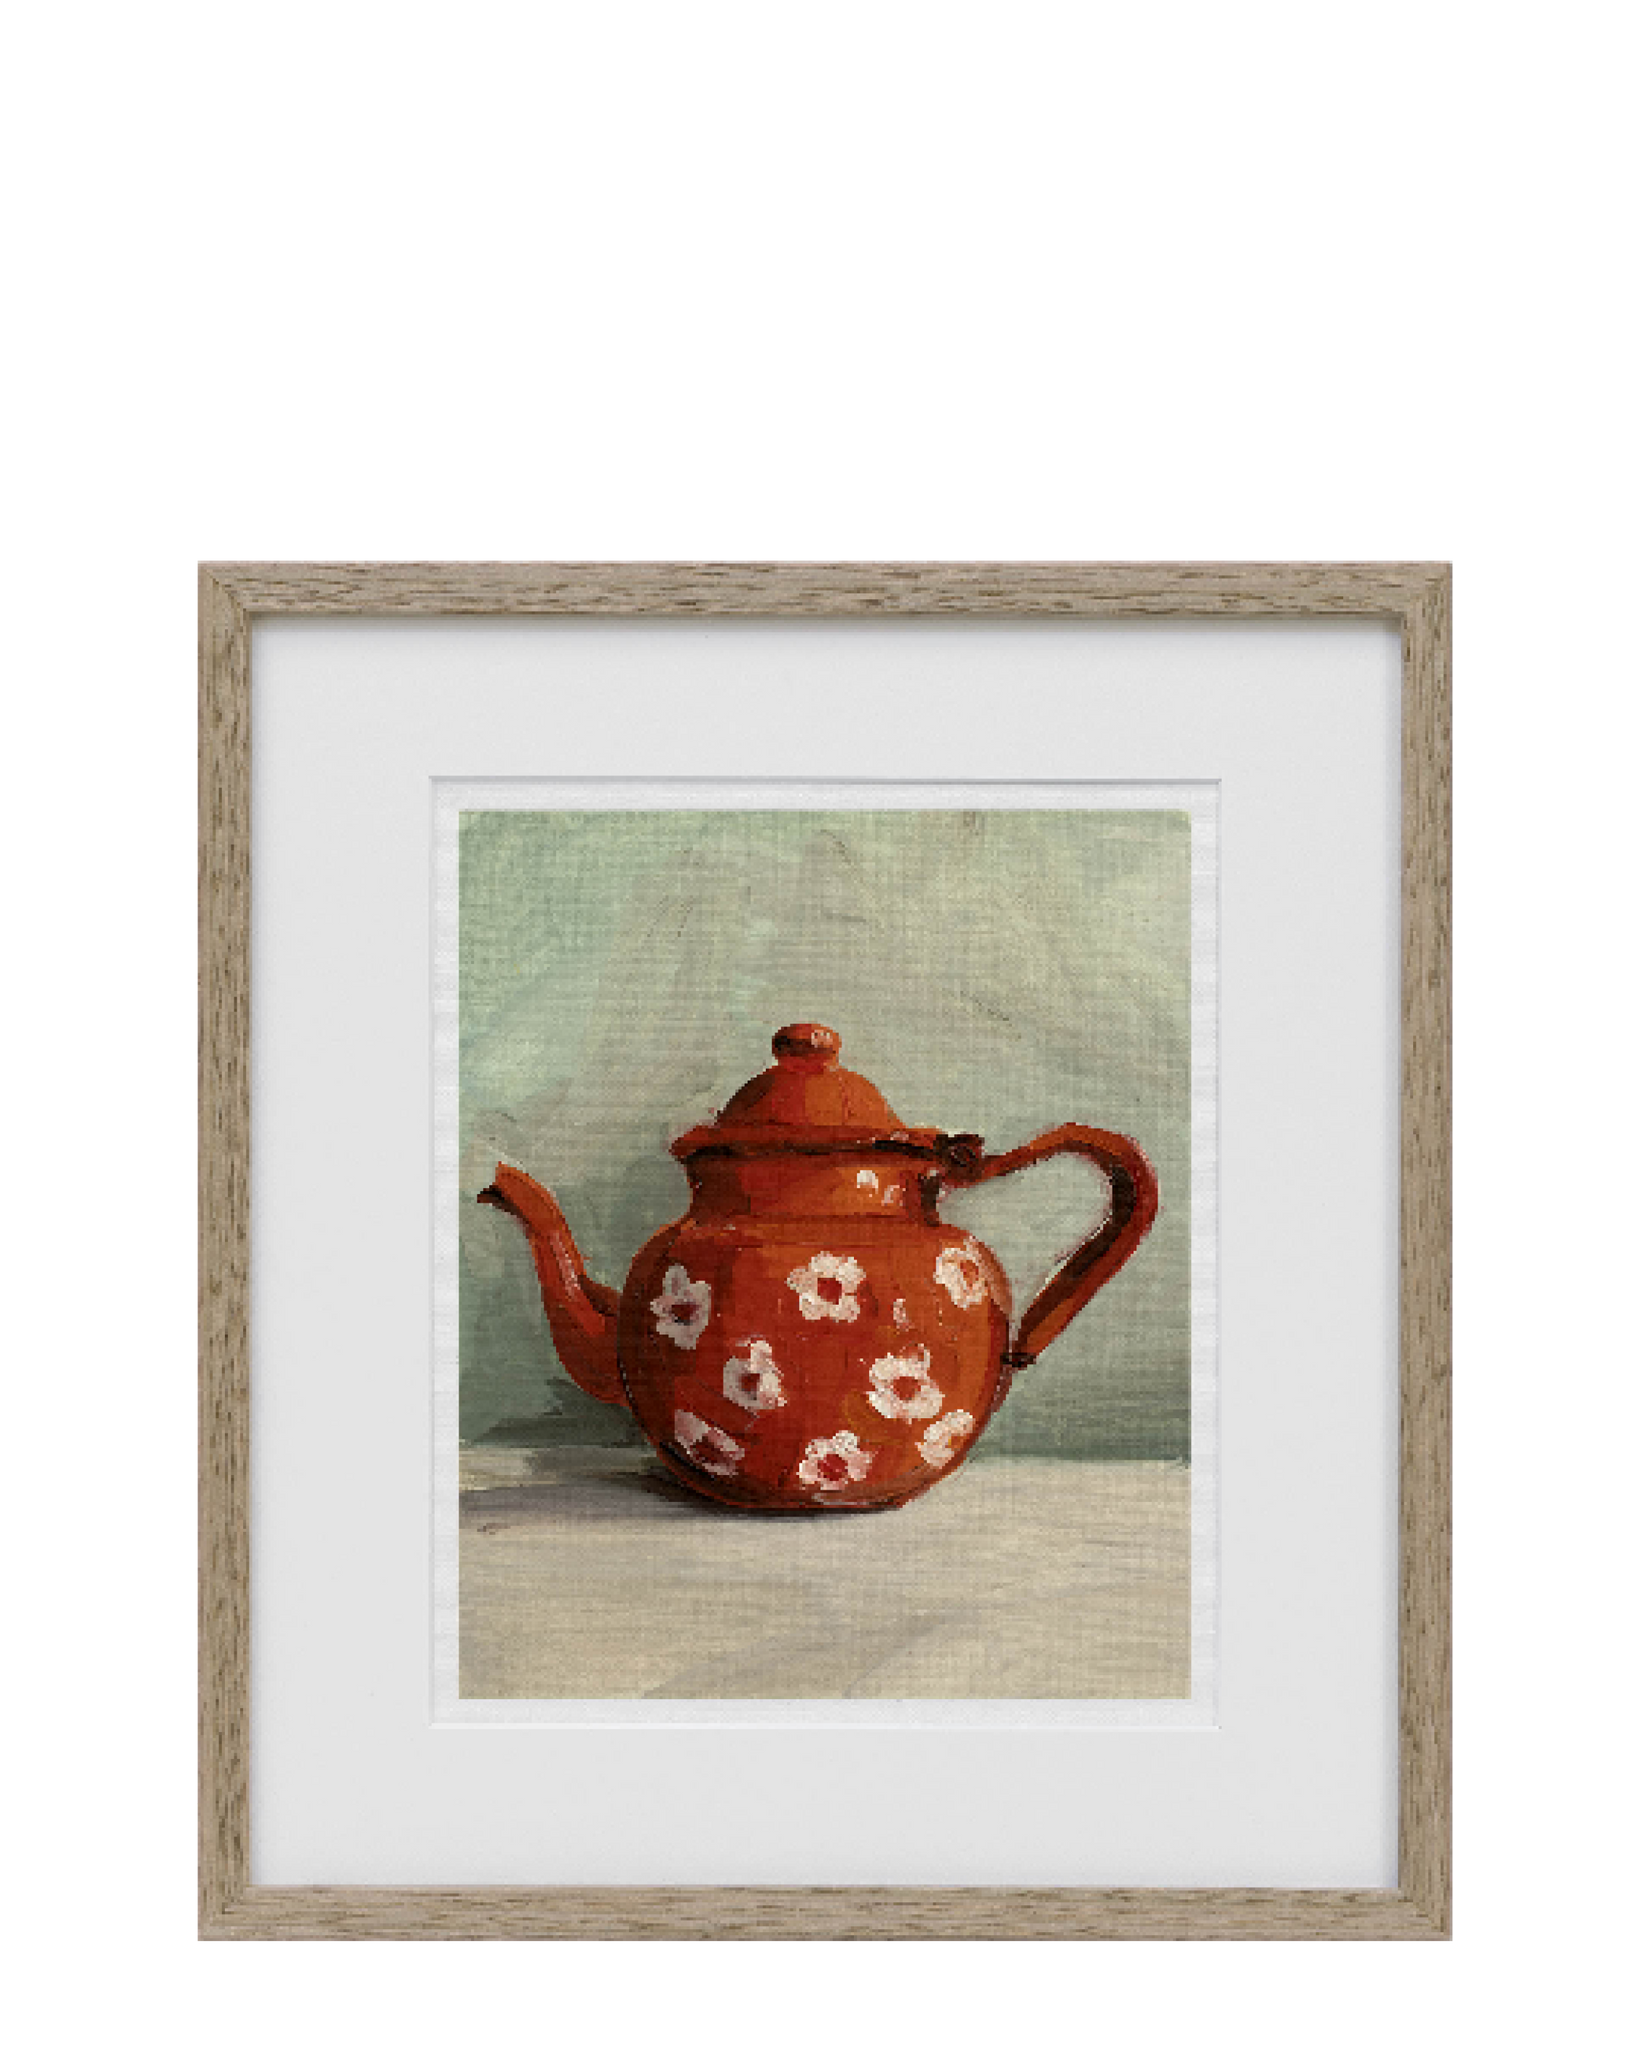 Red and White Daisy Teapot